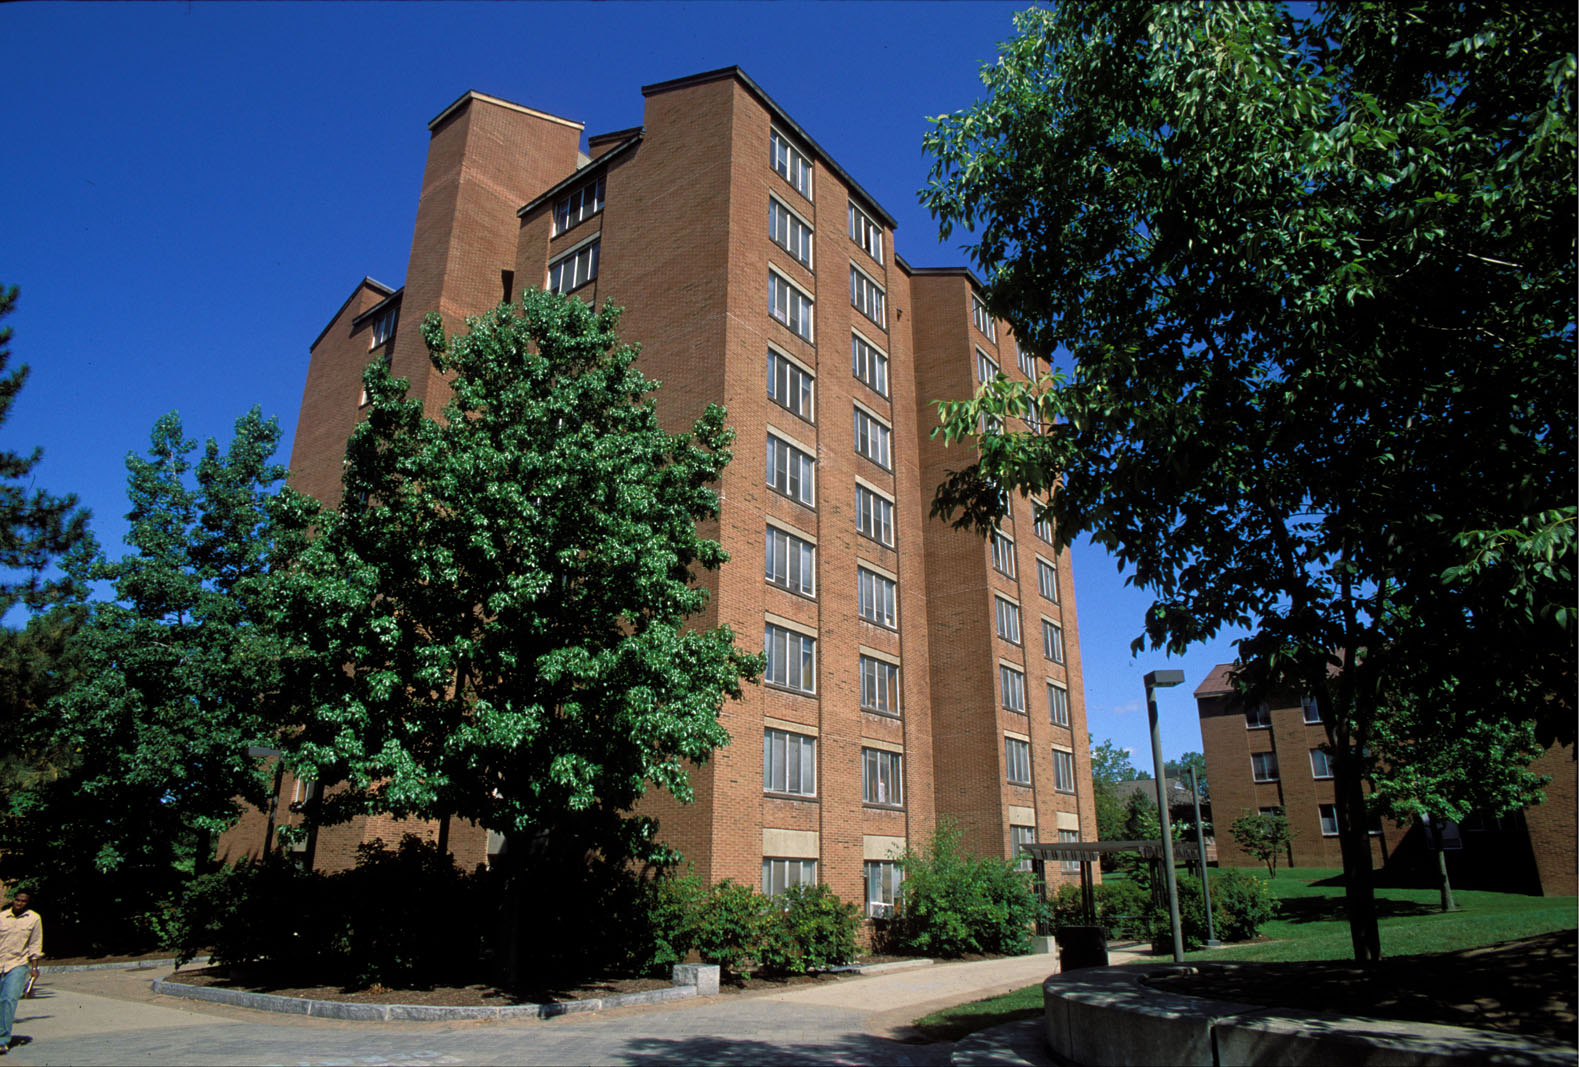 Exterior photo of High Rise 5 with green trees and bushes around it on a sunny day with a blue sky